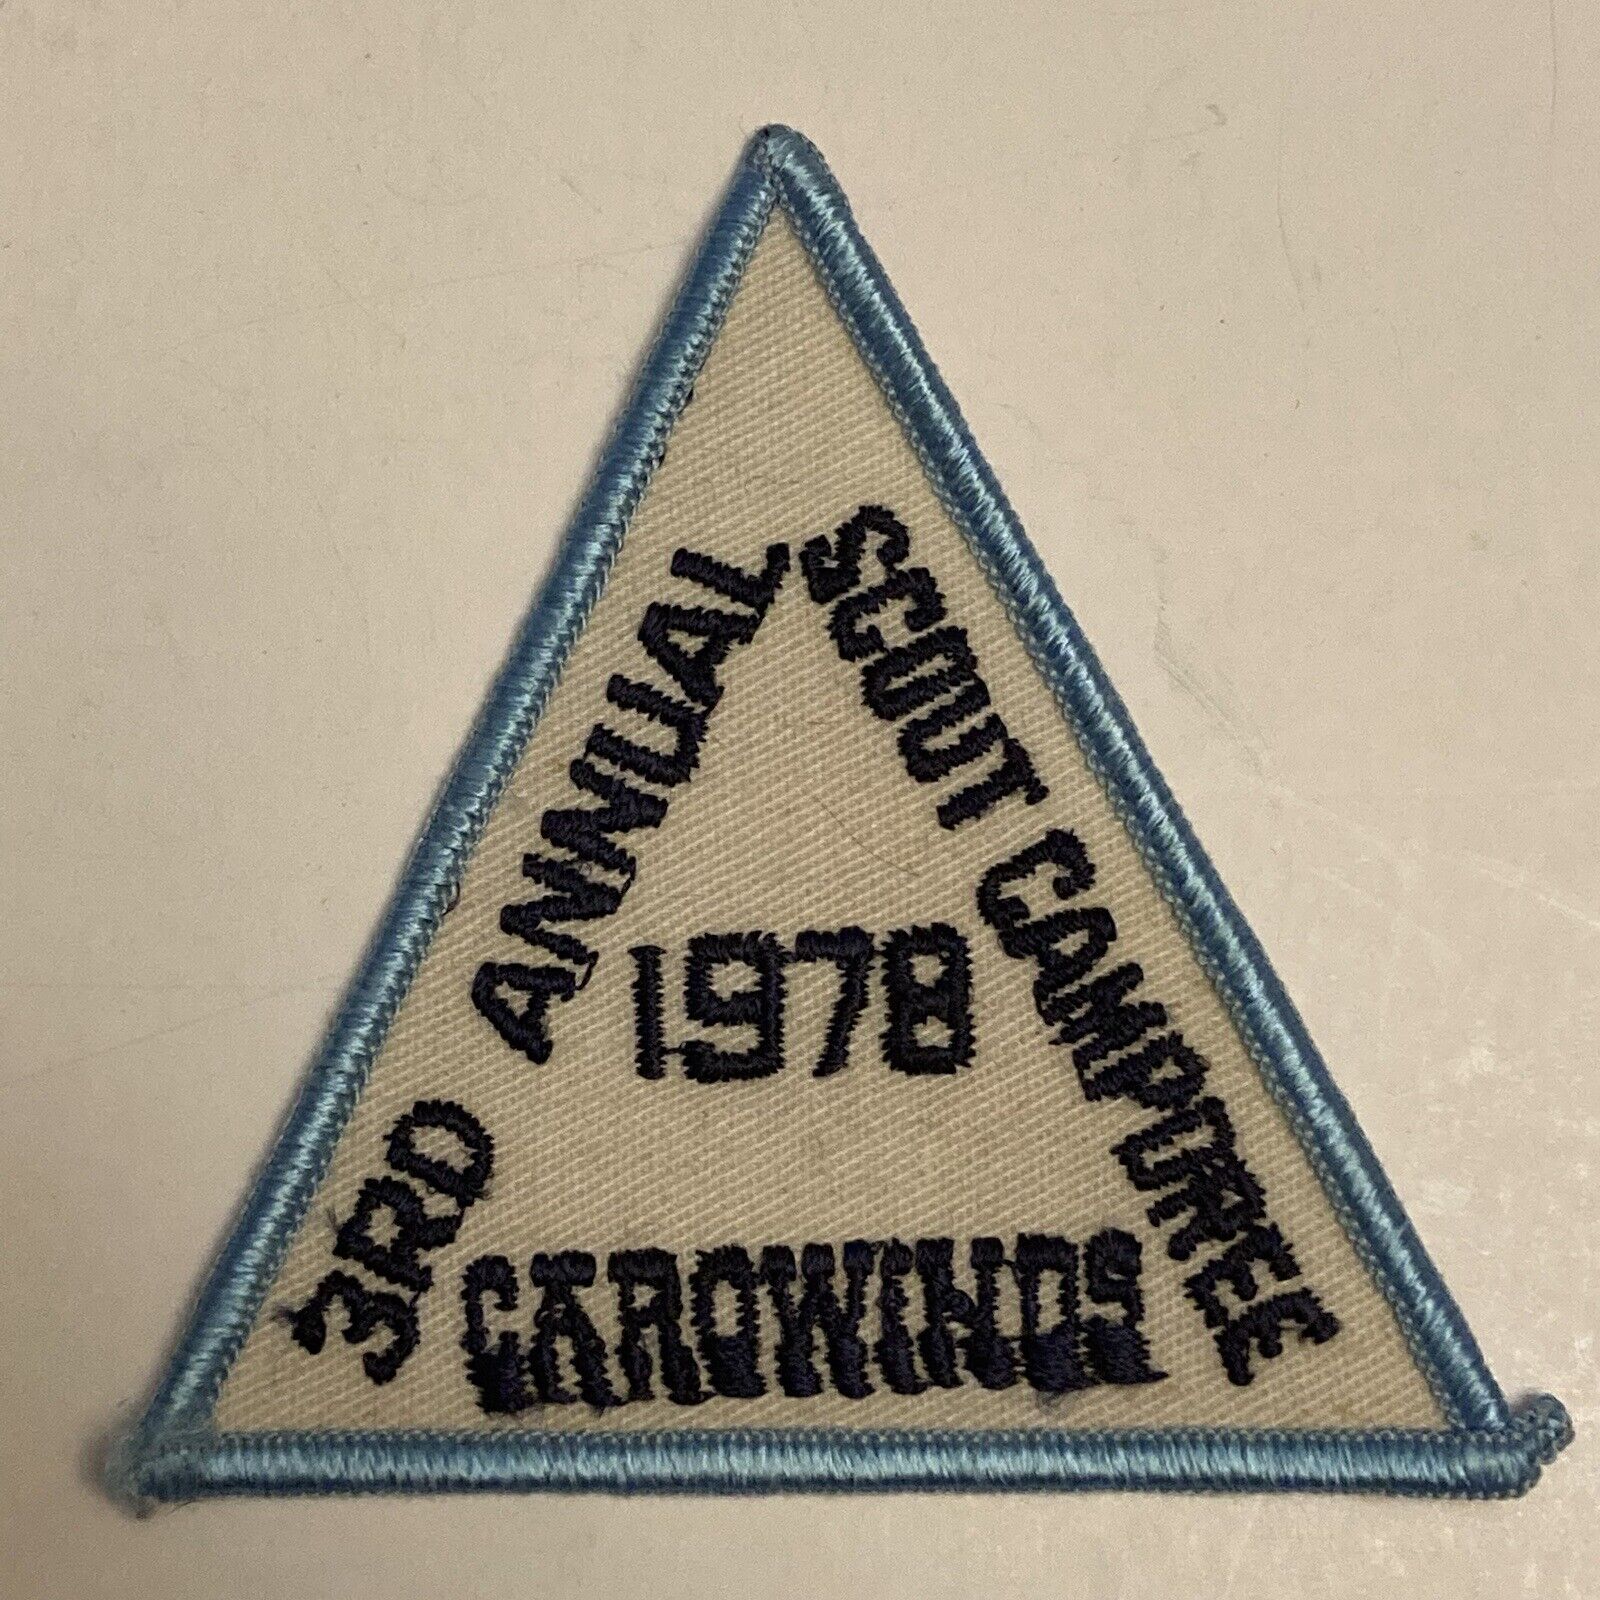 VTG Girl Scout Patch Badge Carowinds 1978 3rd Annual Scout Encampment Rare 1970s